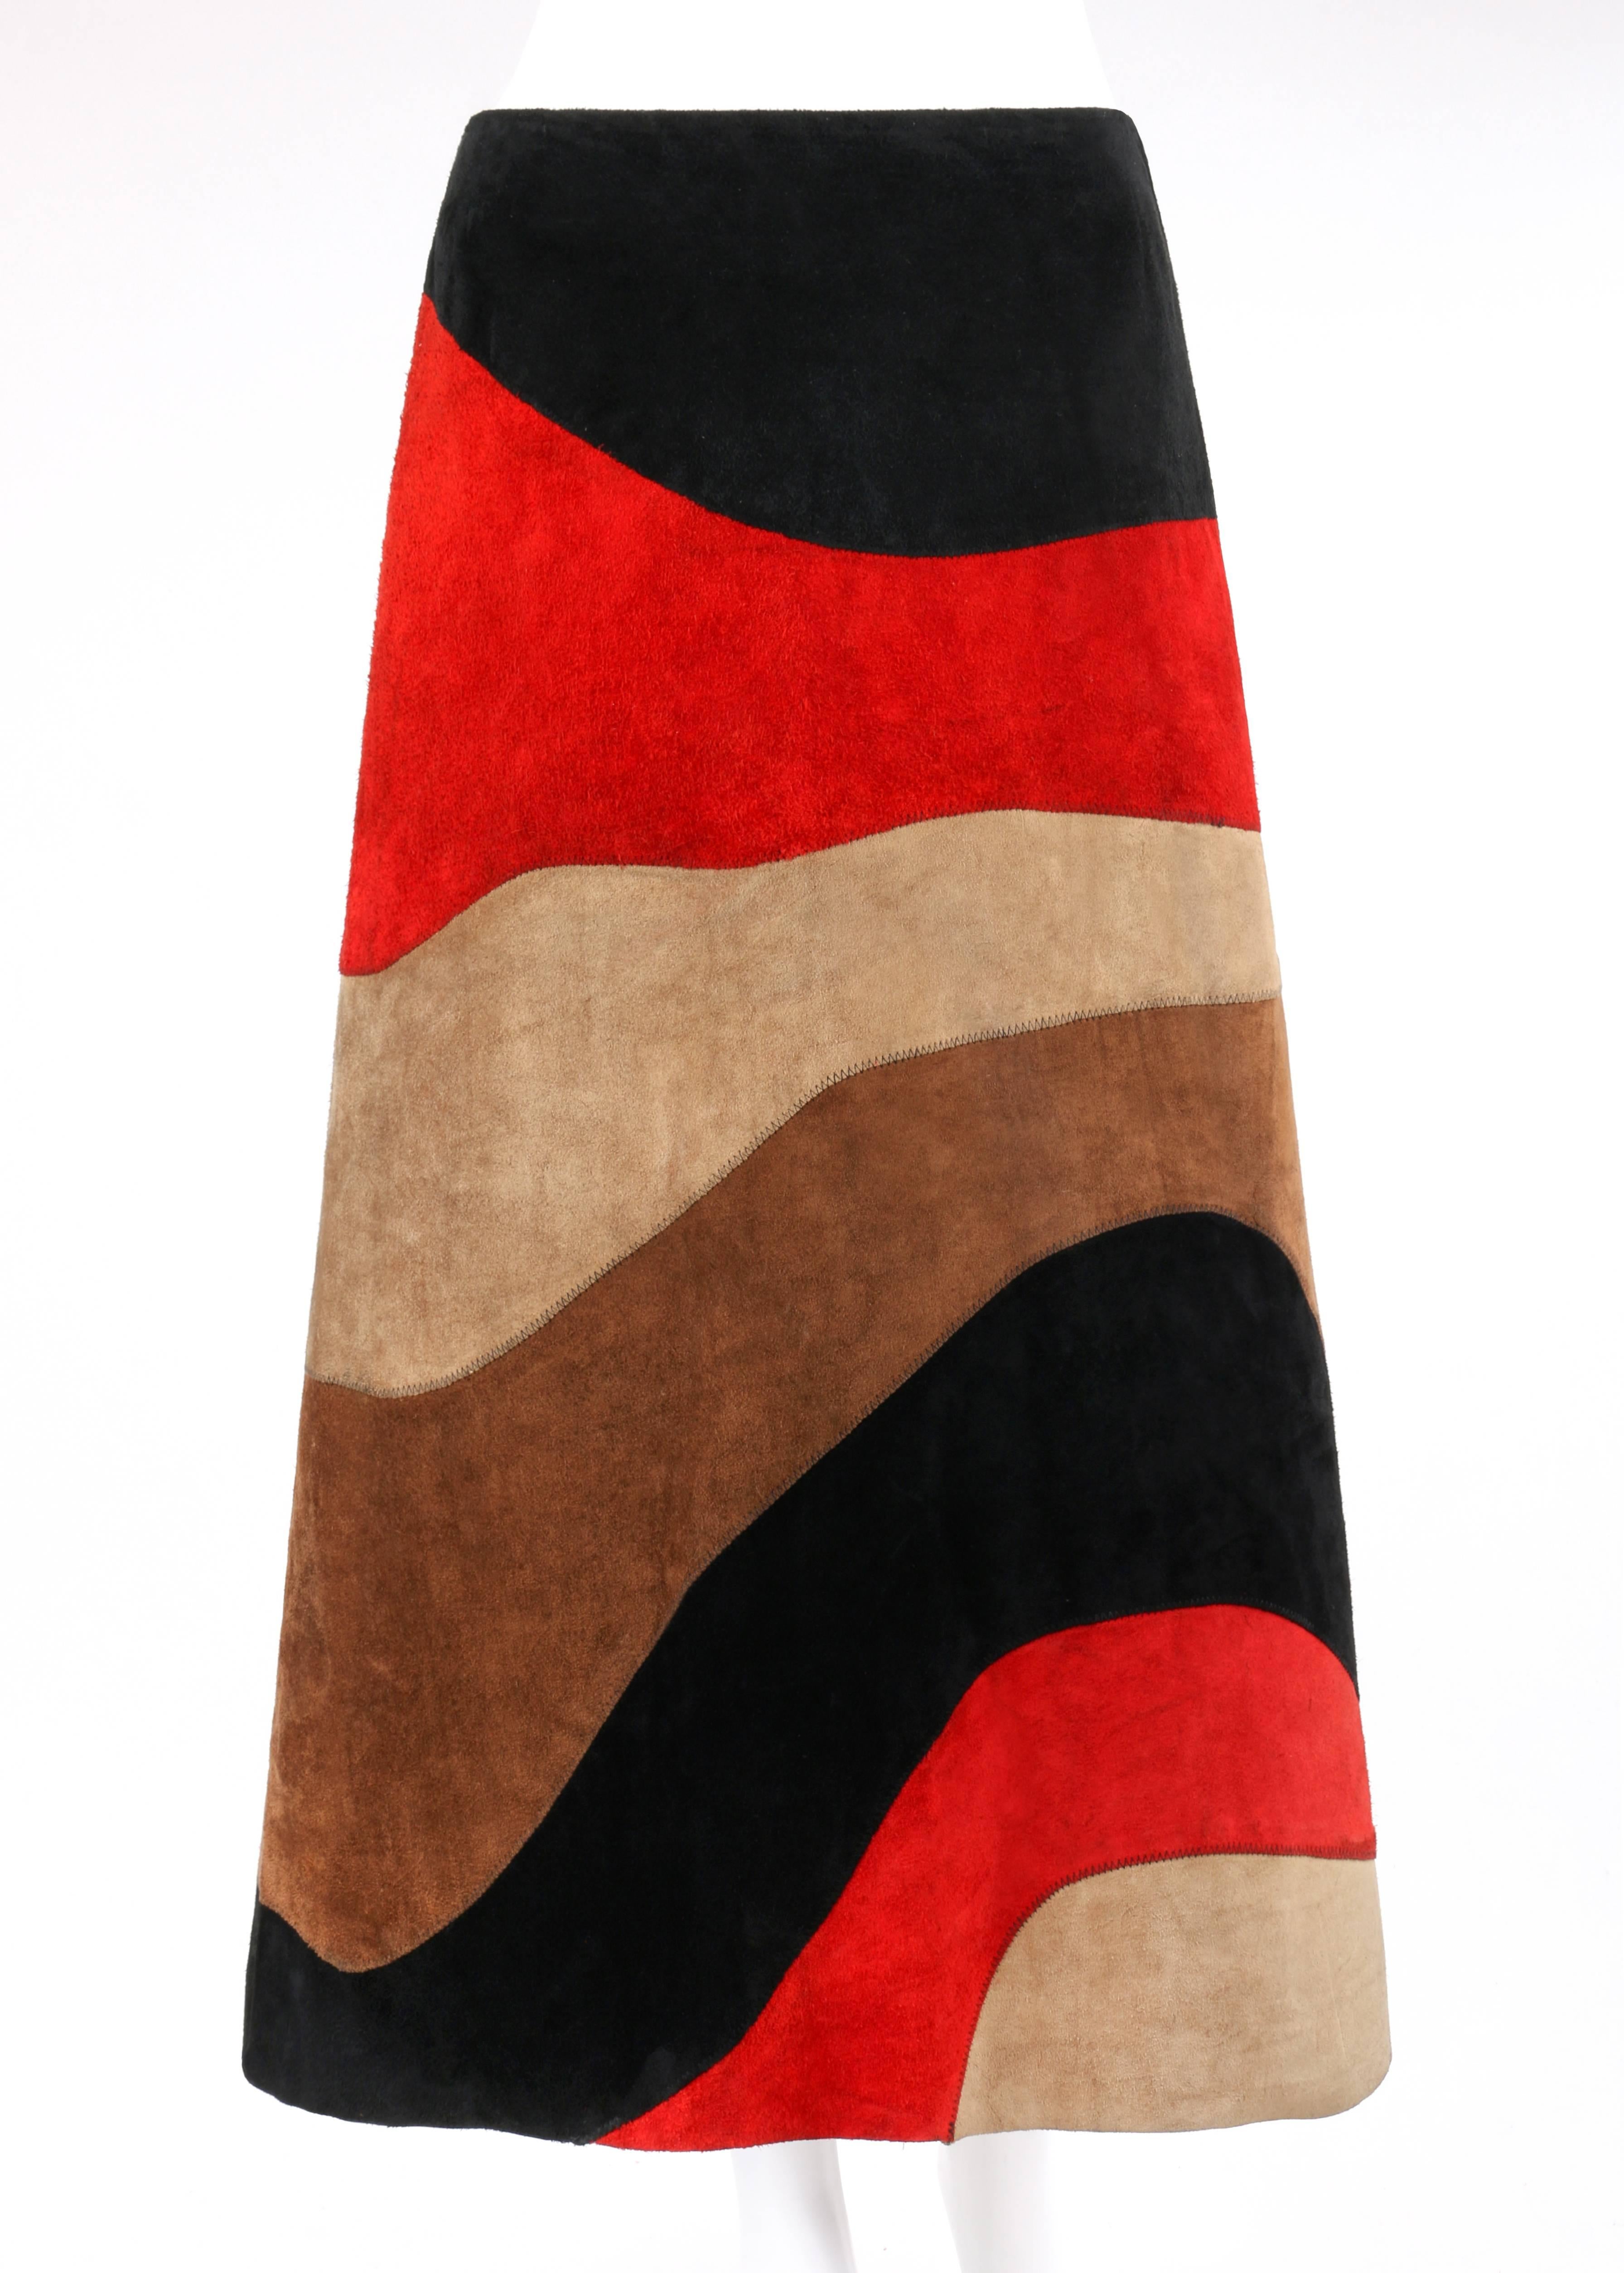 Vintage Anne Klein c.1970's red black brown color block suede leather a-line skirt. Designed by Donna Karan. Color-blocked wave pattern suede leather in shades of black, red, beige, and brown. Zig-zag overlay stitch detail throughout. Raw-edge hem.